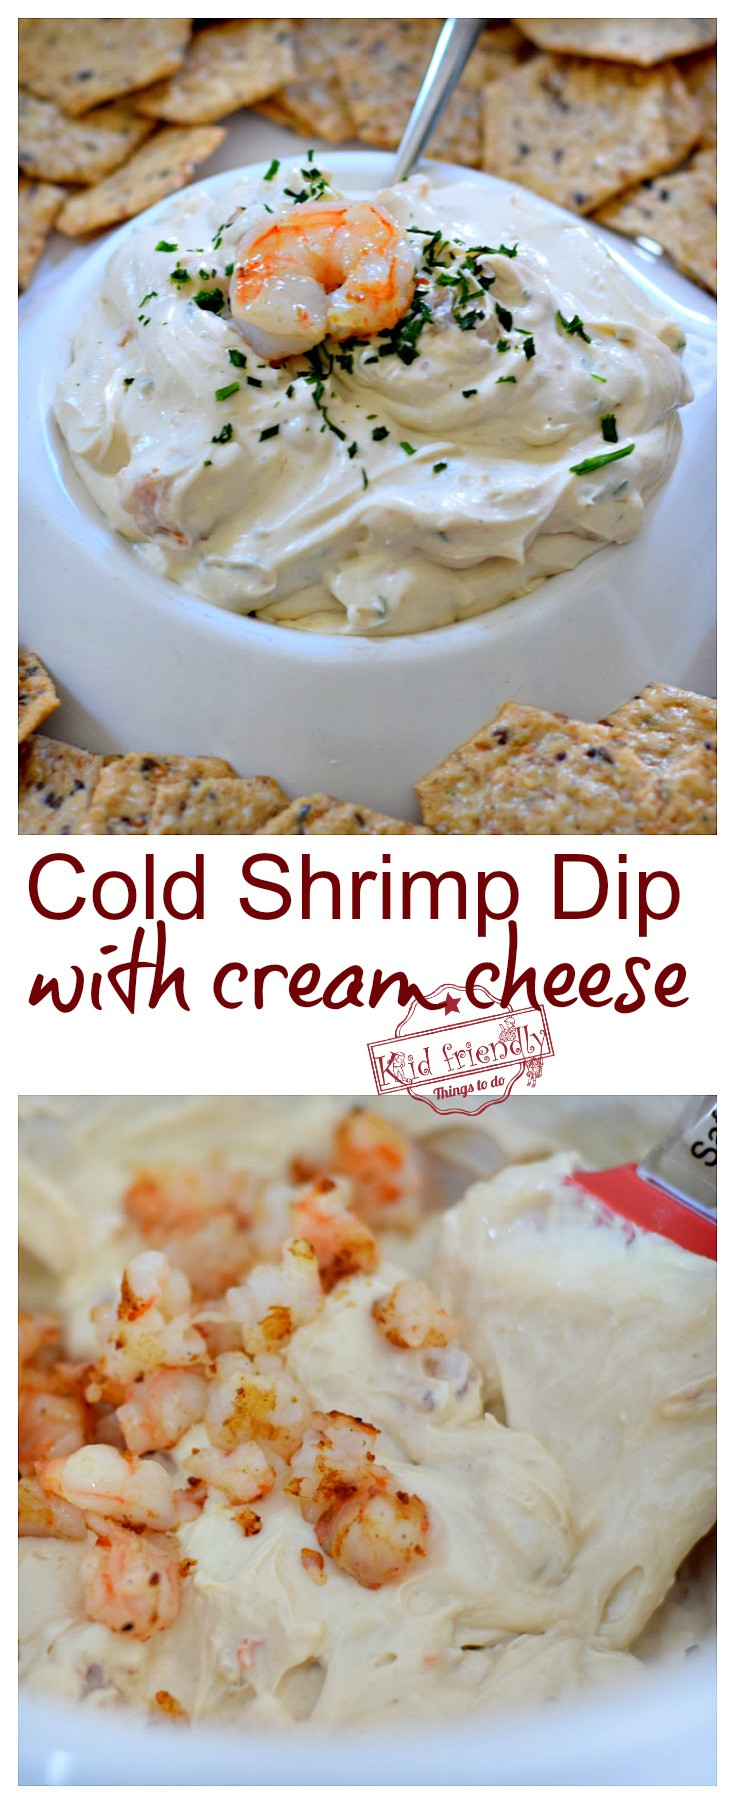 Cold Shrimp Appetizers
 The Best Cold Shrimp Dip Recipe With Cream Cheese